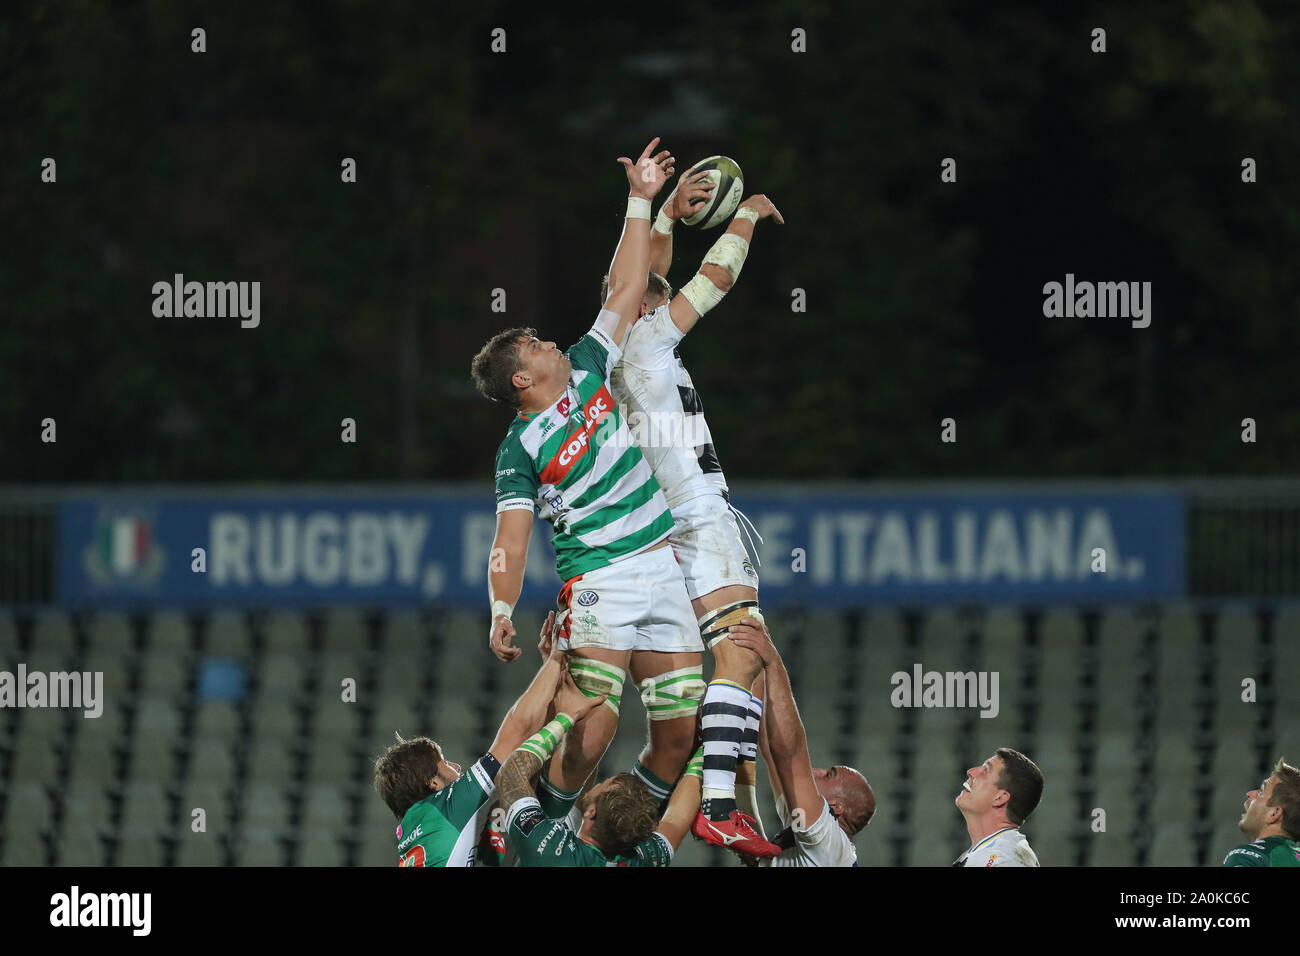 Parma, Italy, 20 Sep 2019, ELY SNYMAN CONTENDE LA BALL IN TOUCHE A JOHAN  MEYER during